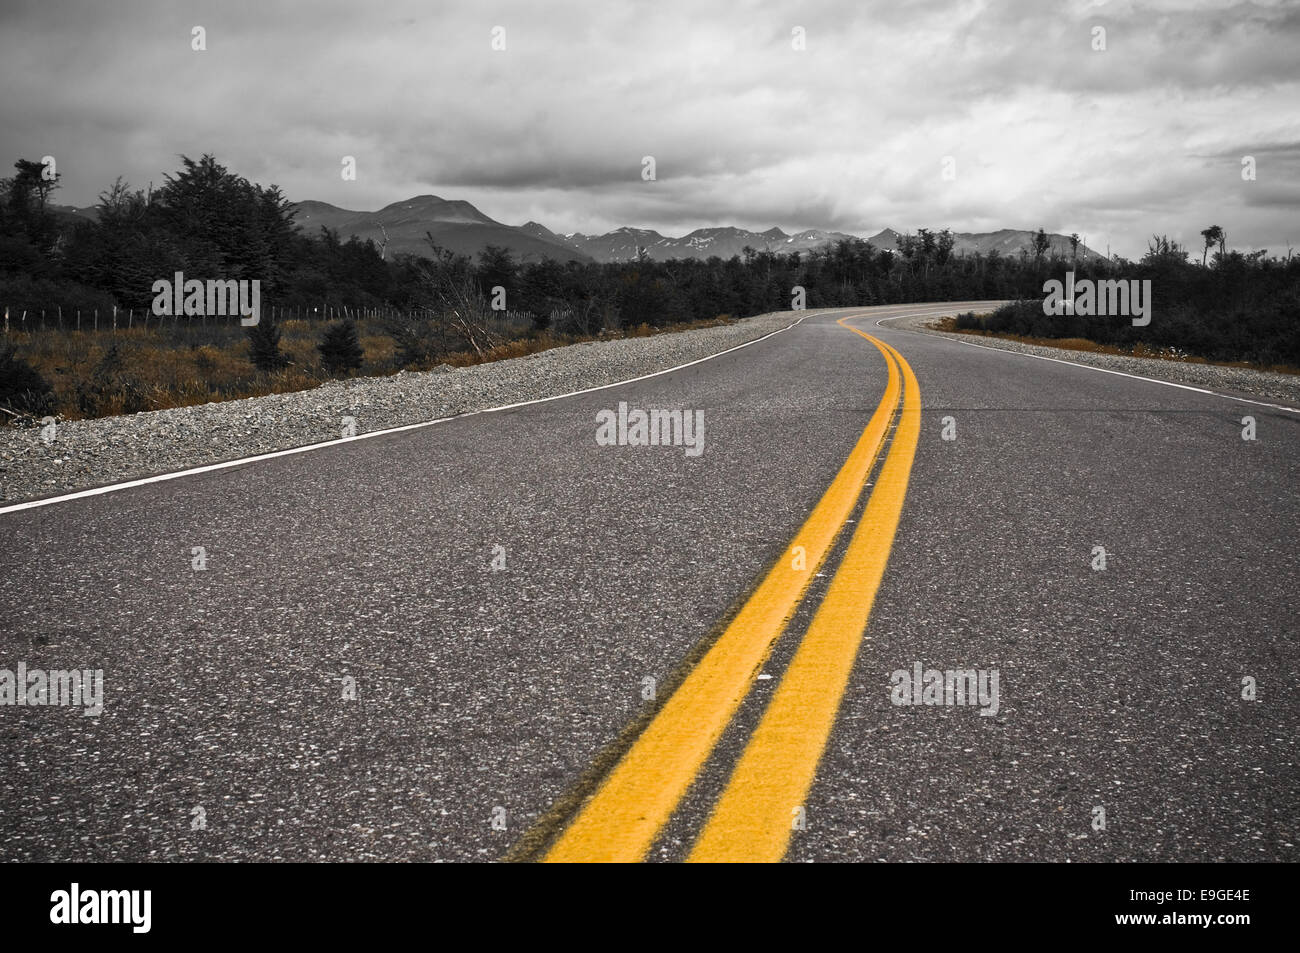 yellow dividing line of highway Stock Photo